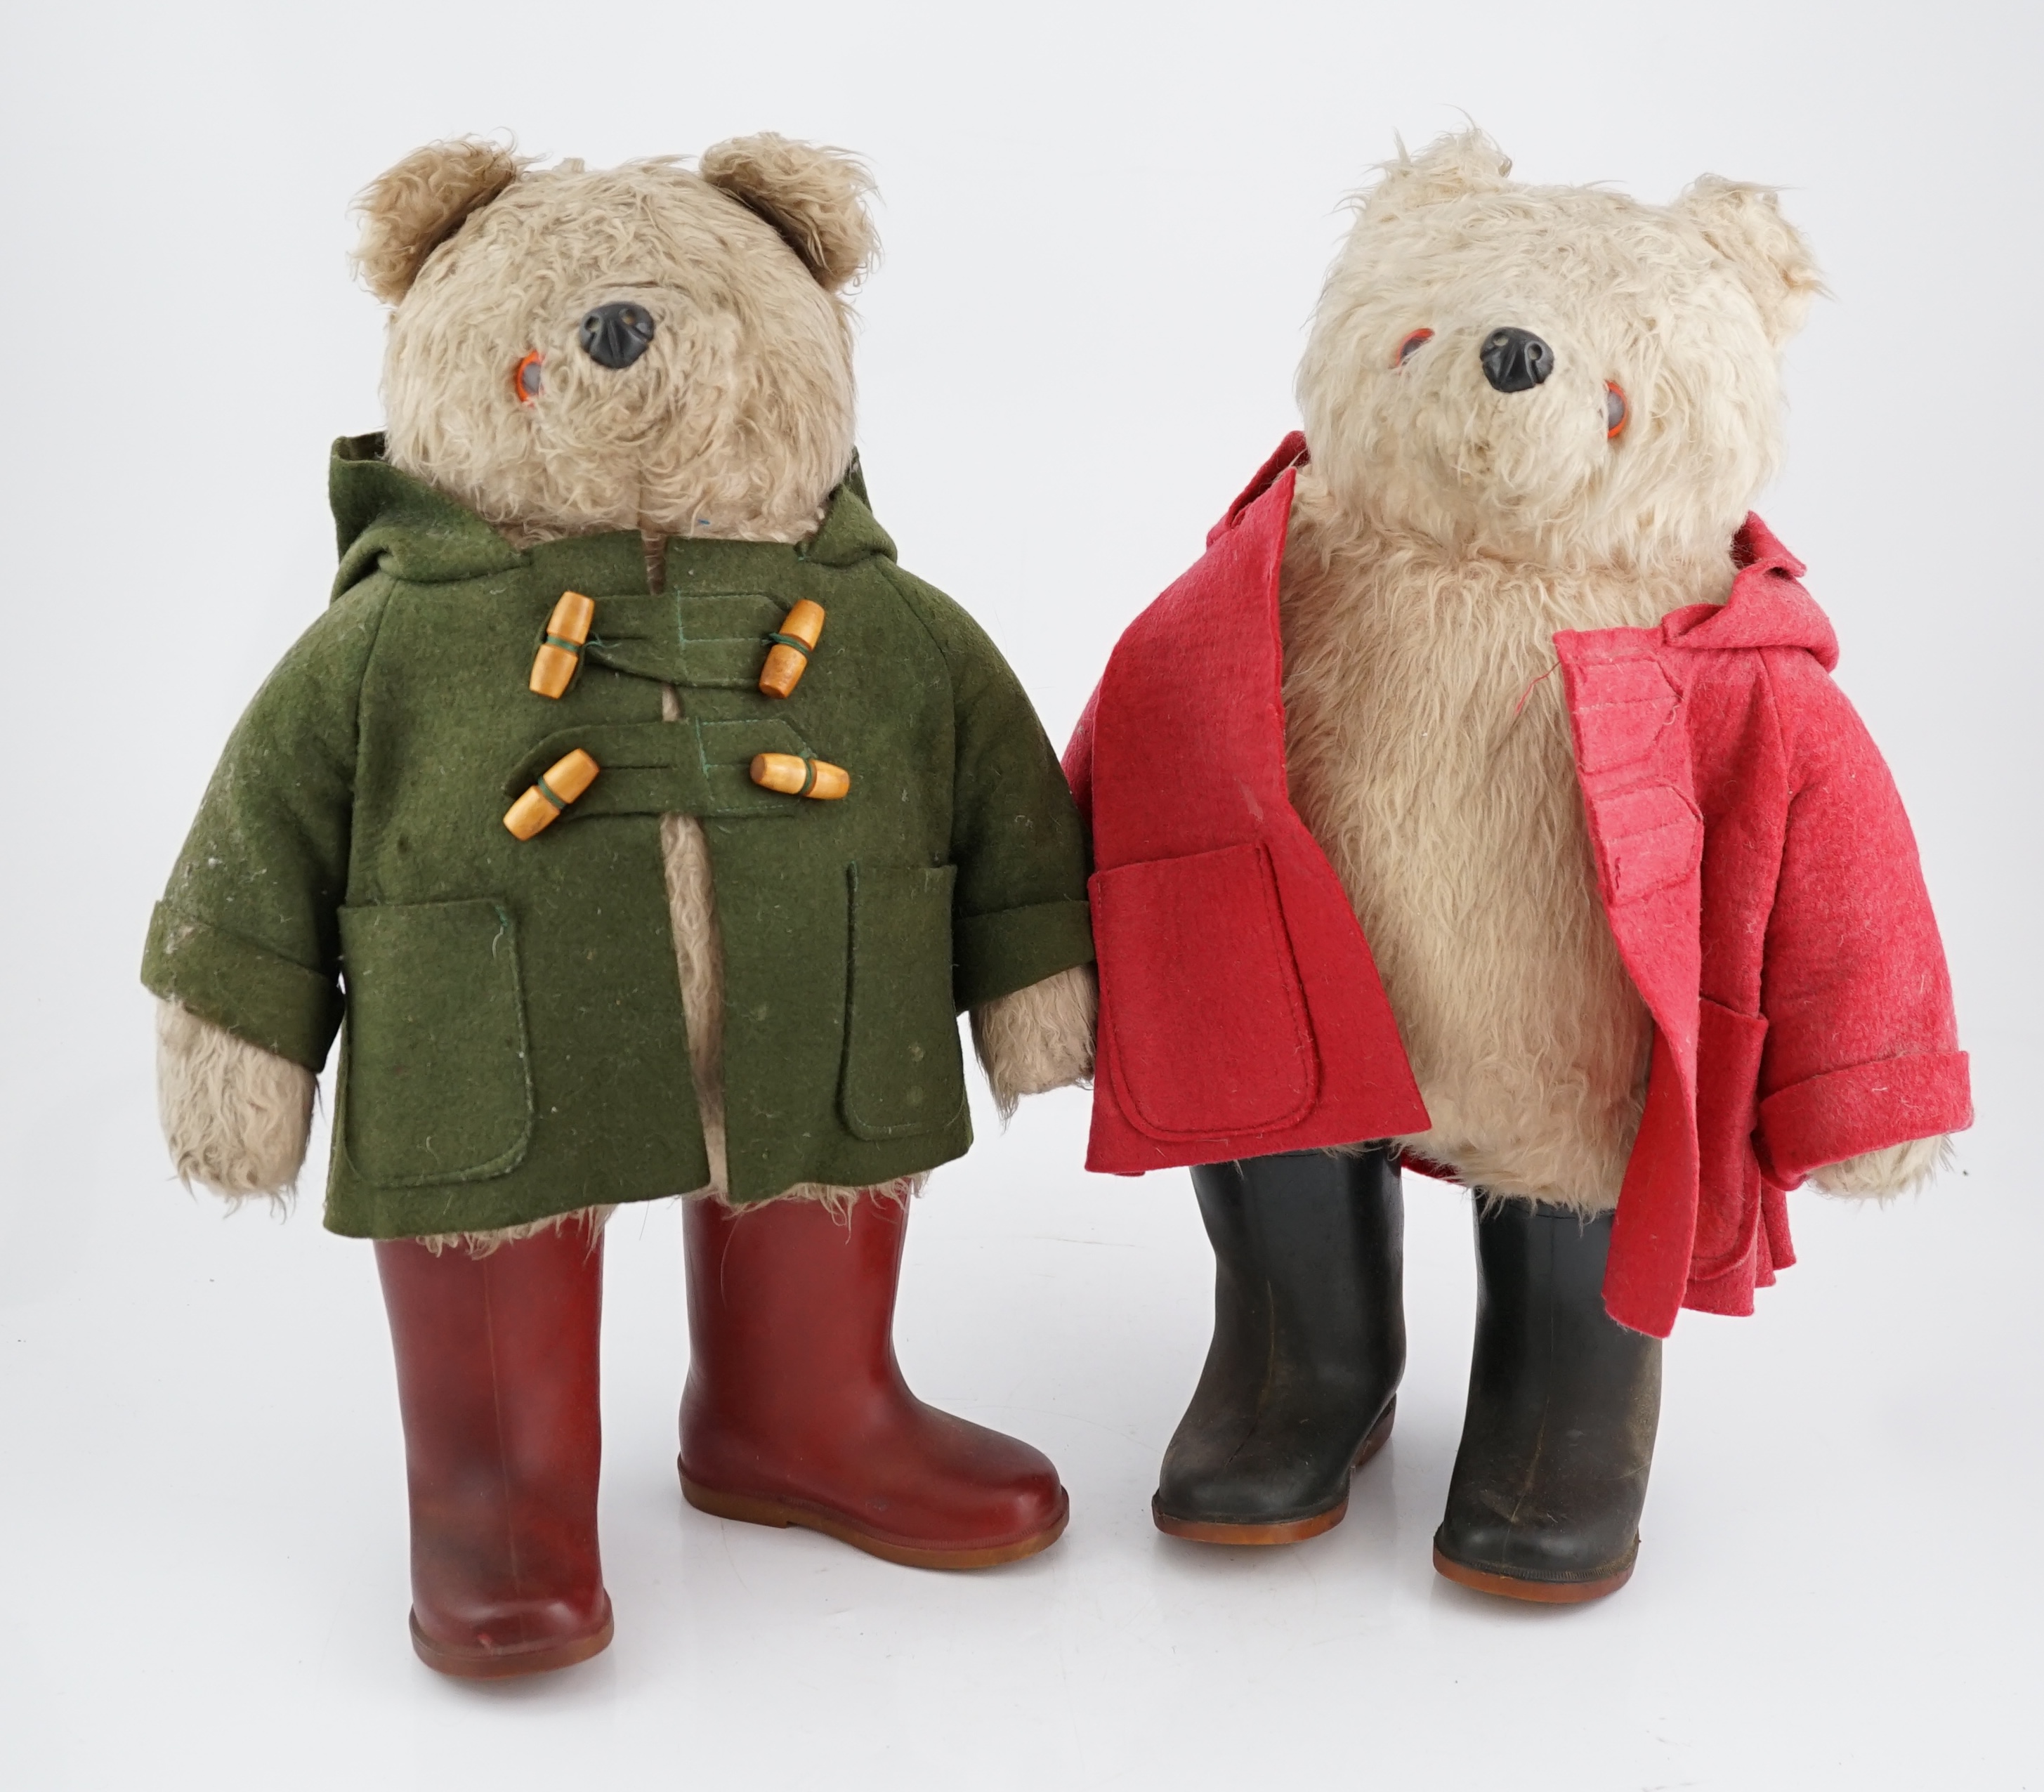 An early Paddington bear, green jacket, missing hat, and a similar Paddington with Dunlop boots, red